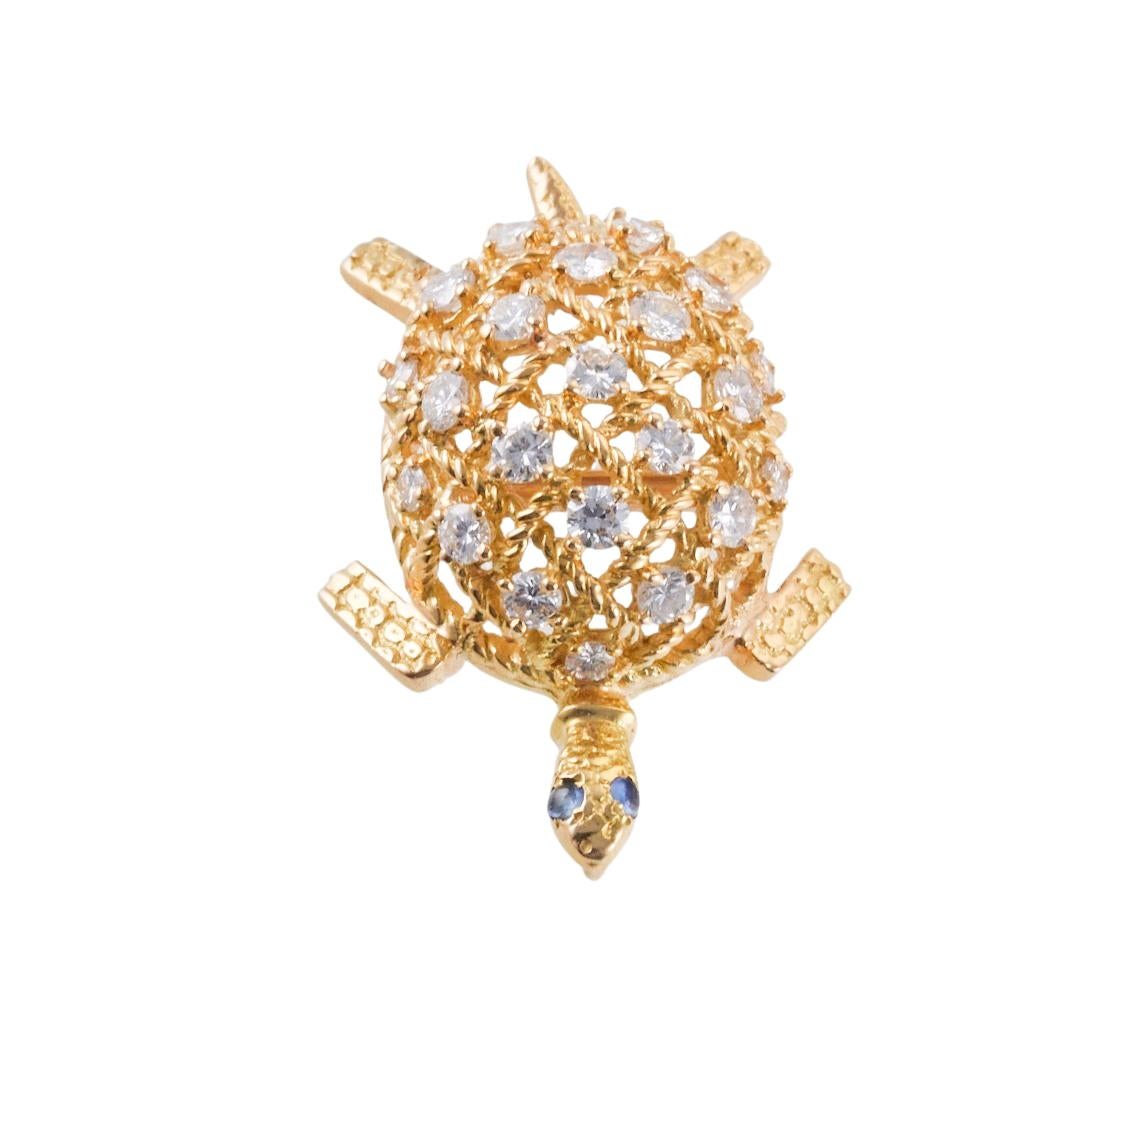 Adorable 18k gold Cartier turtle brooch, set with sapphire eyes and approx. 1.10ctw G/VS diamonds. Brooch measures 37mm x 25mm. Marked Cartier, 750.  Weight of the piece - 12.5 grams. 